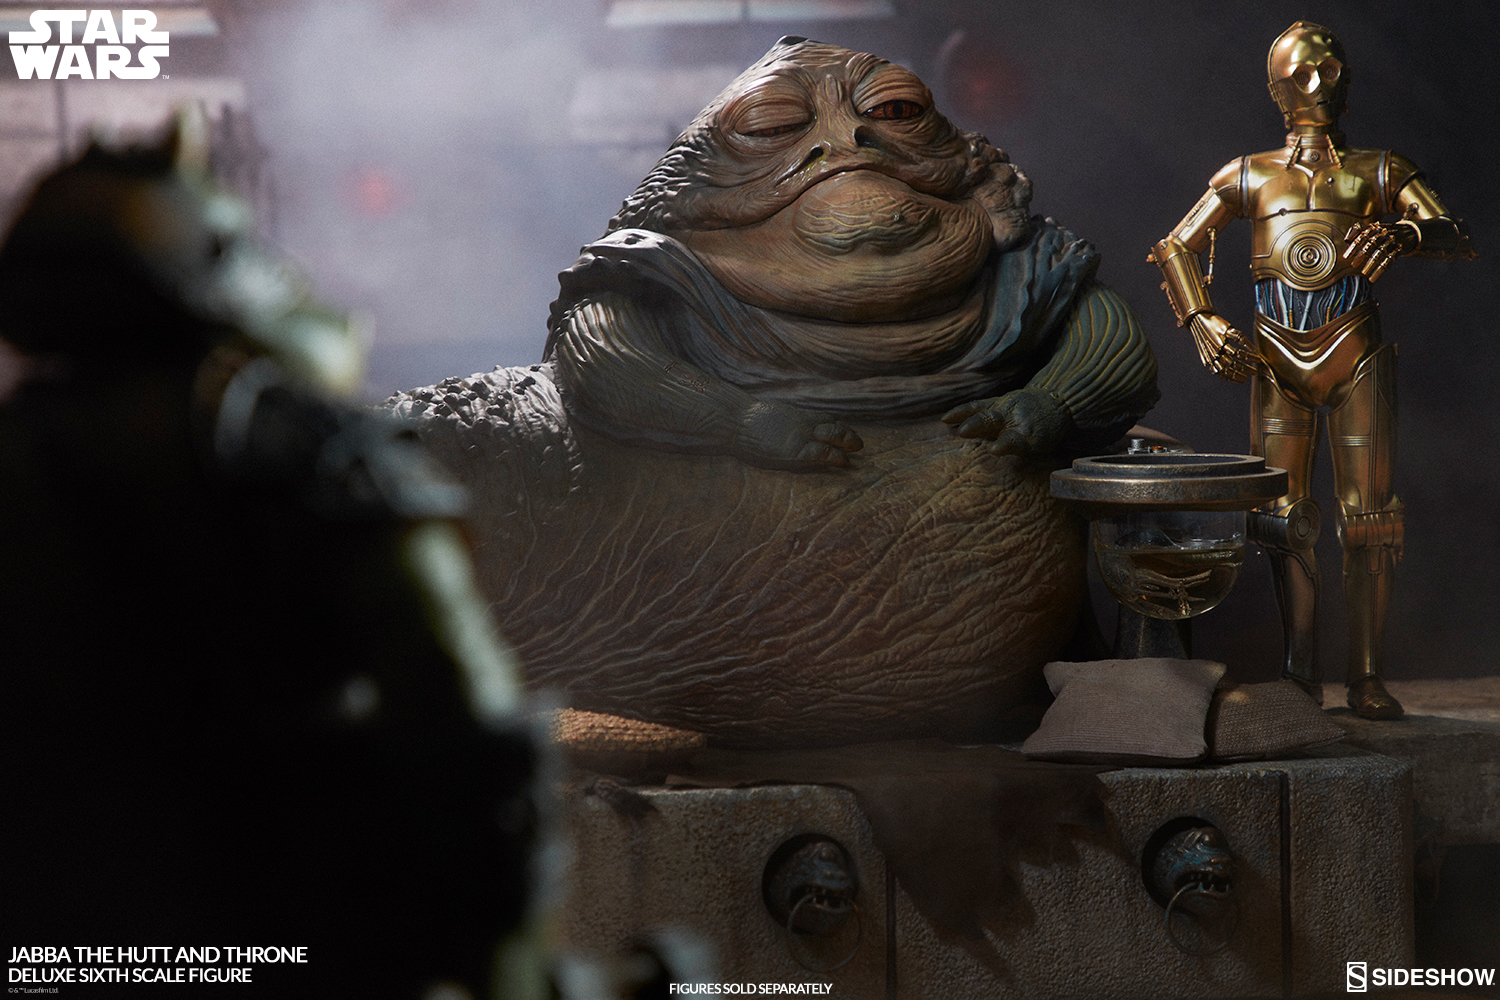 star-wars-jabba-the-hutt-and-throne-deluxe-sixth-scale-figure-sideshow-100410-31